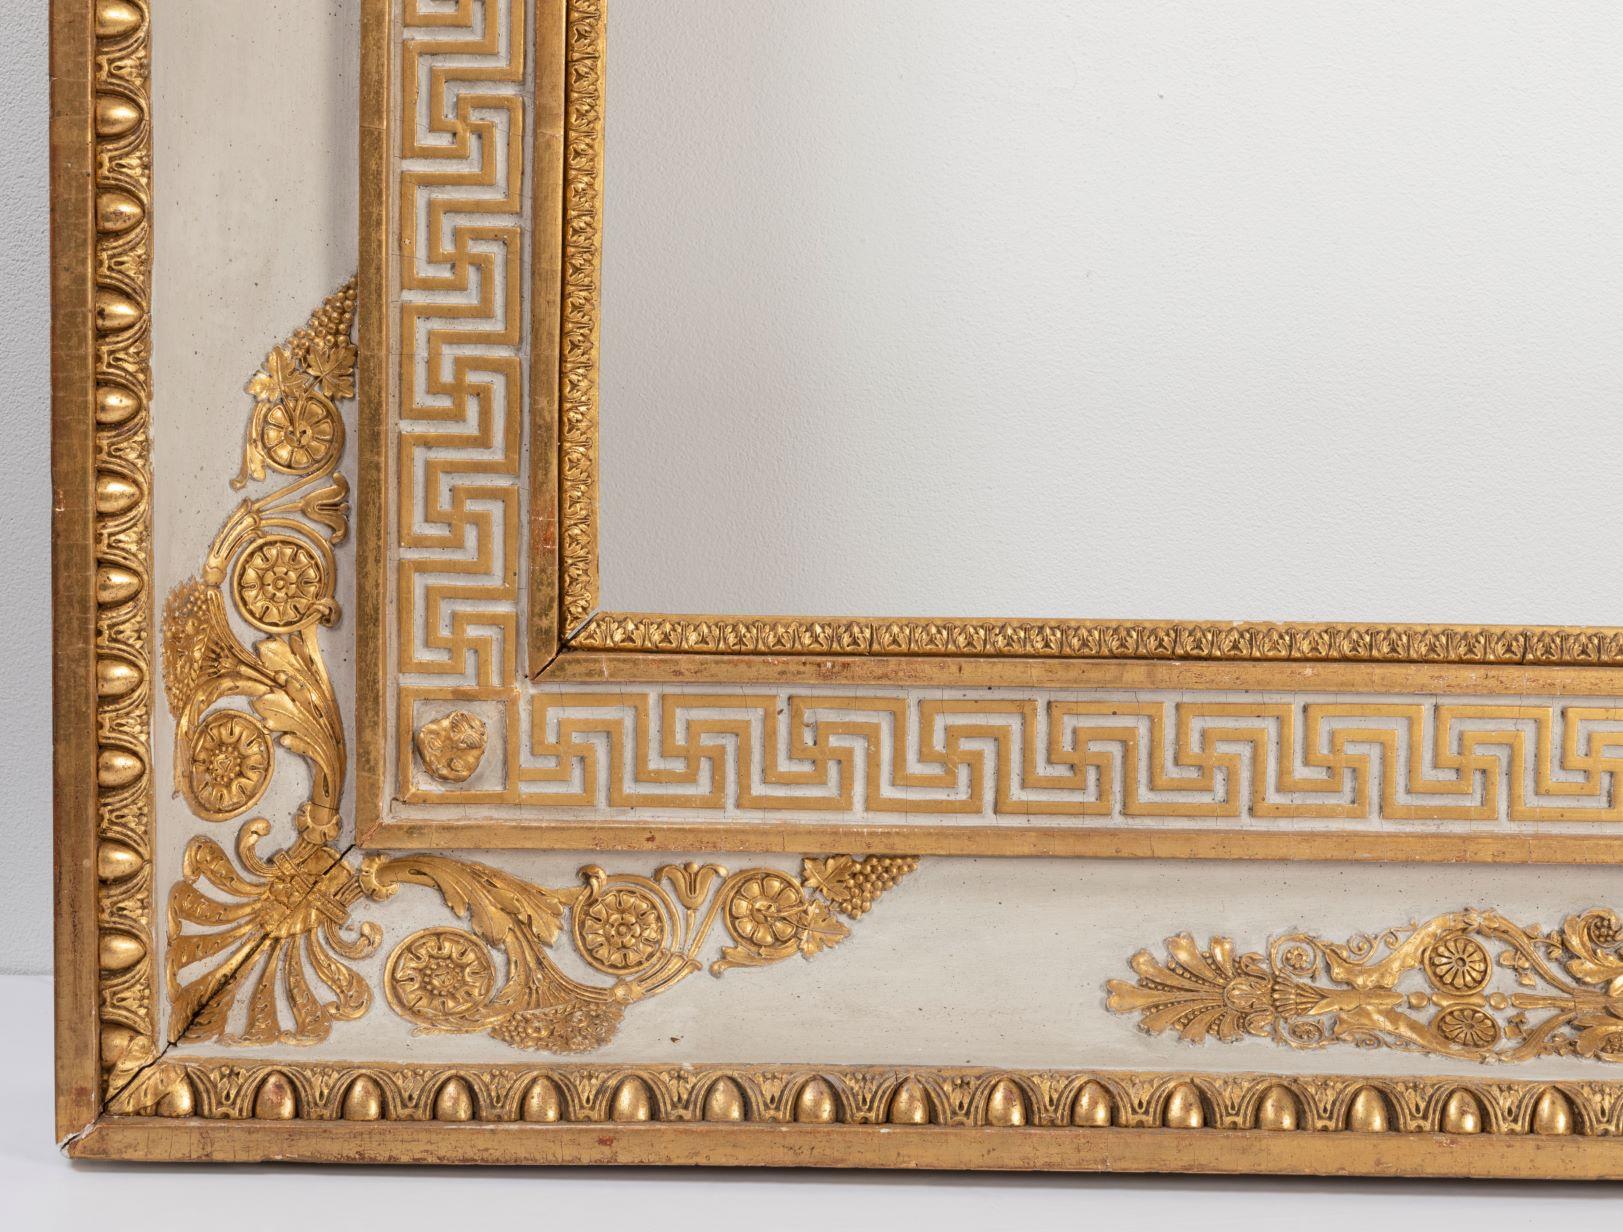 Splendid French Empire Carved Giltwood Frame or Mirror France Early 19th Century In Good Condition For Sale In Saint-Ouen, FR